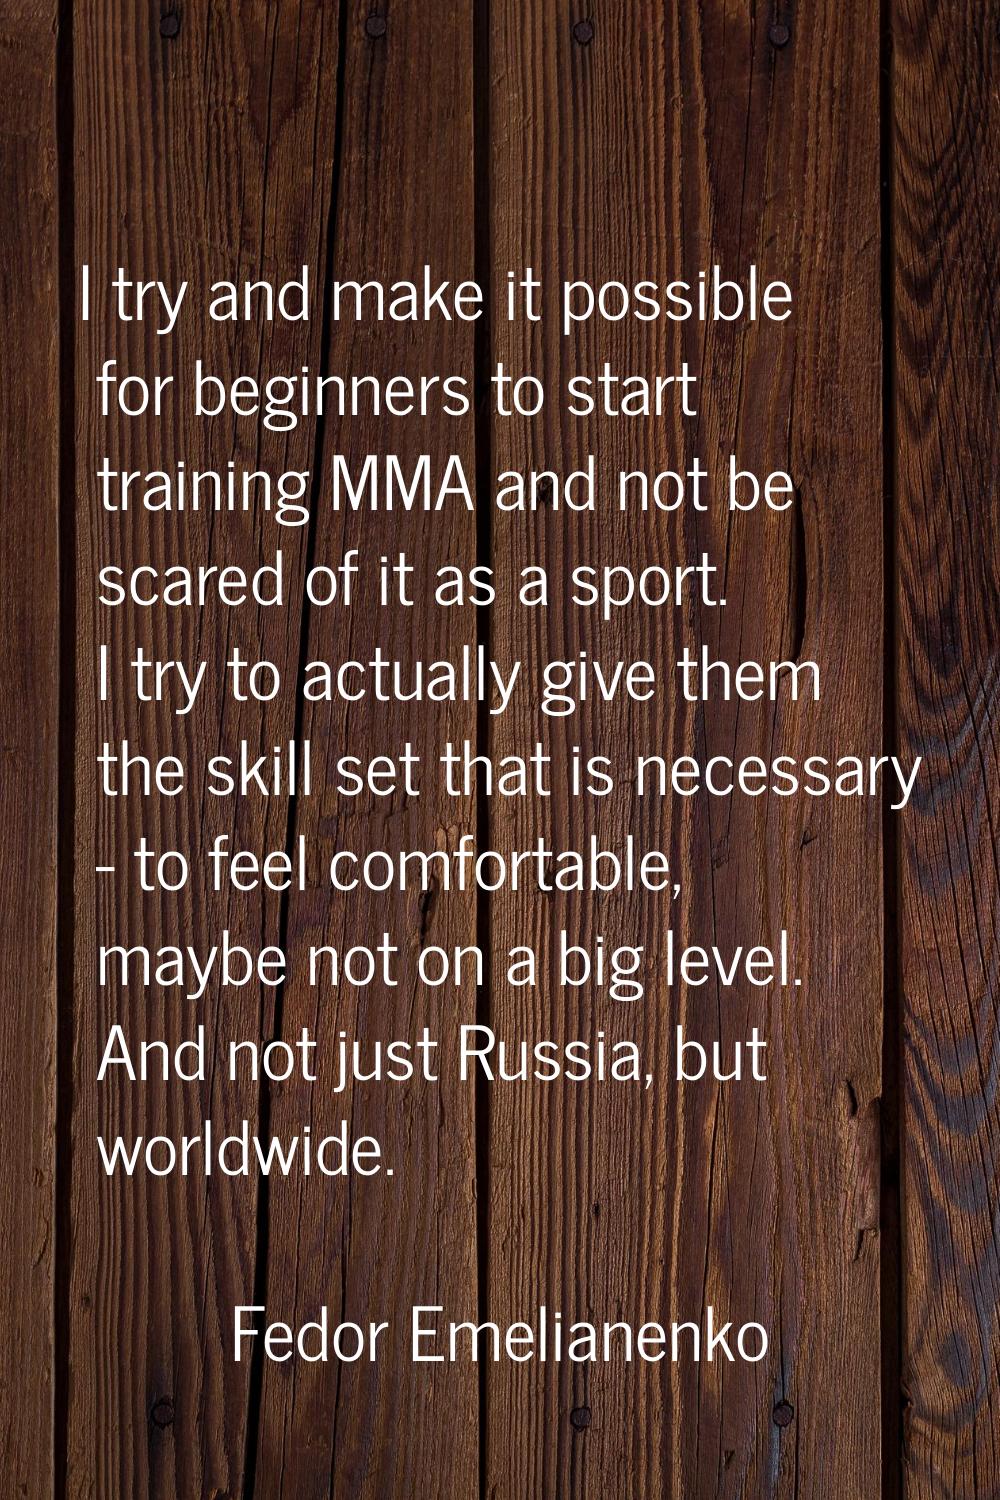 I try and make it possible for beginners to start training MMA and not be scared of it as a sport. 